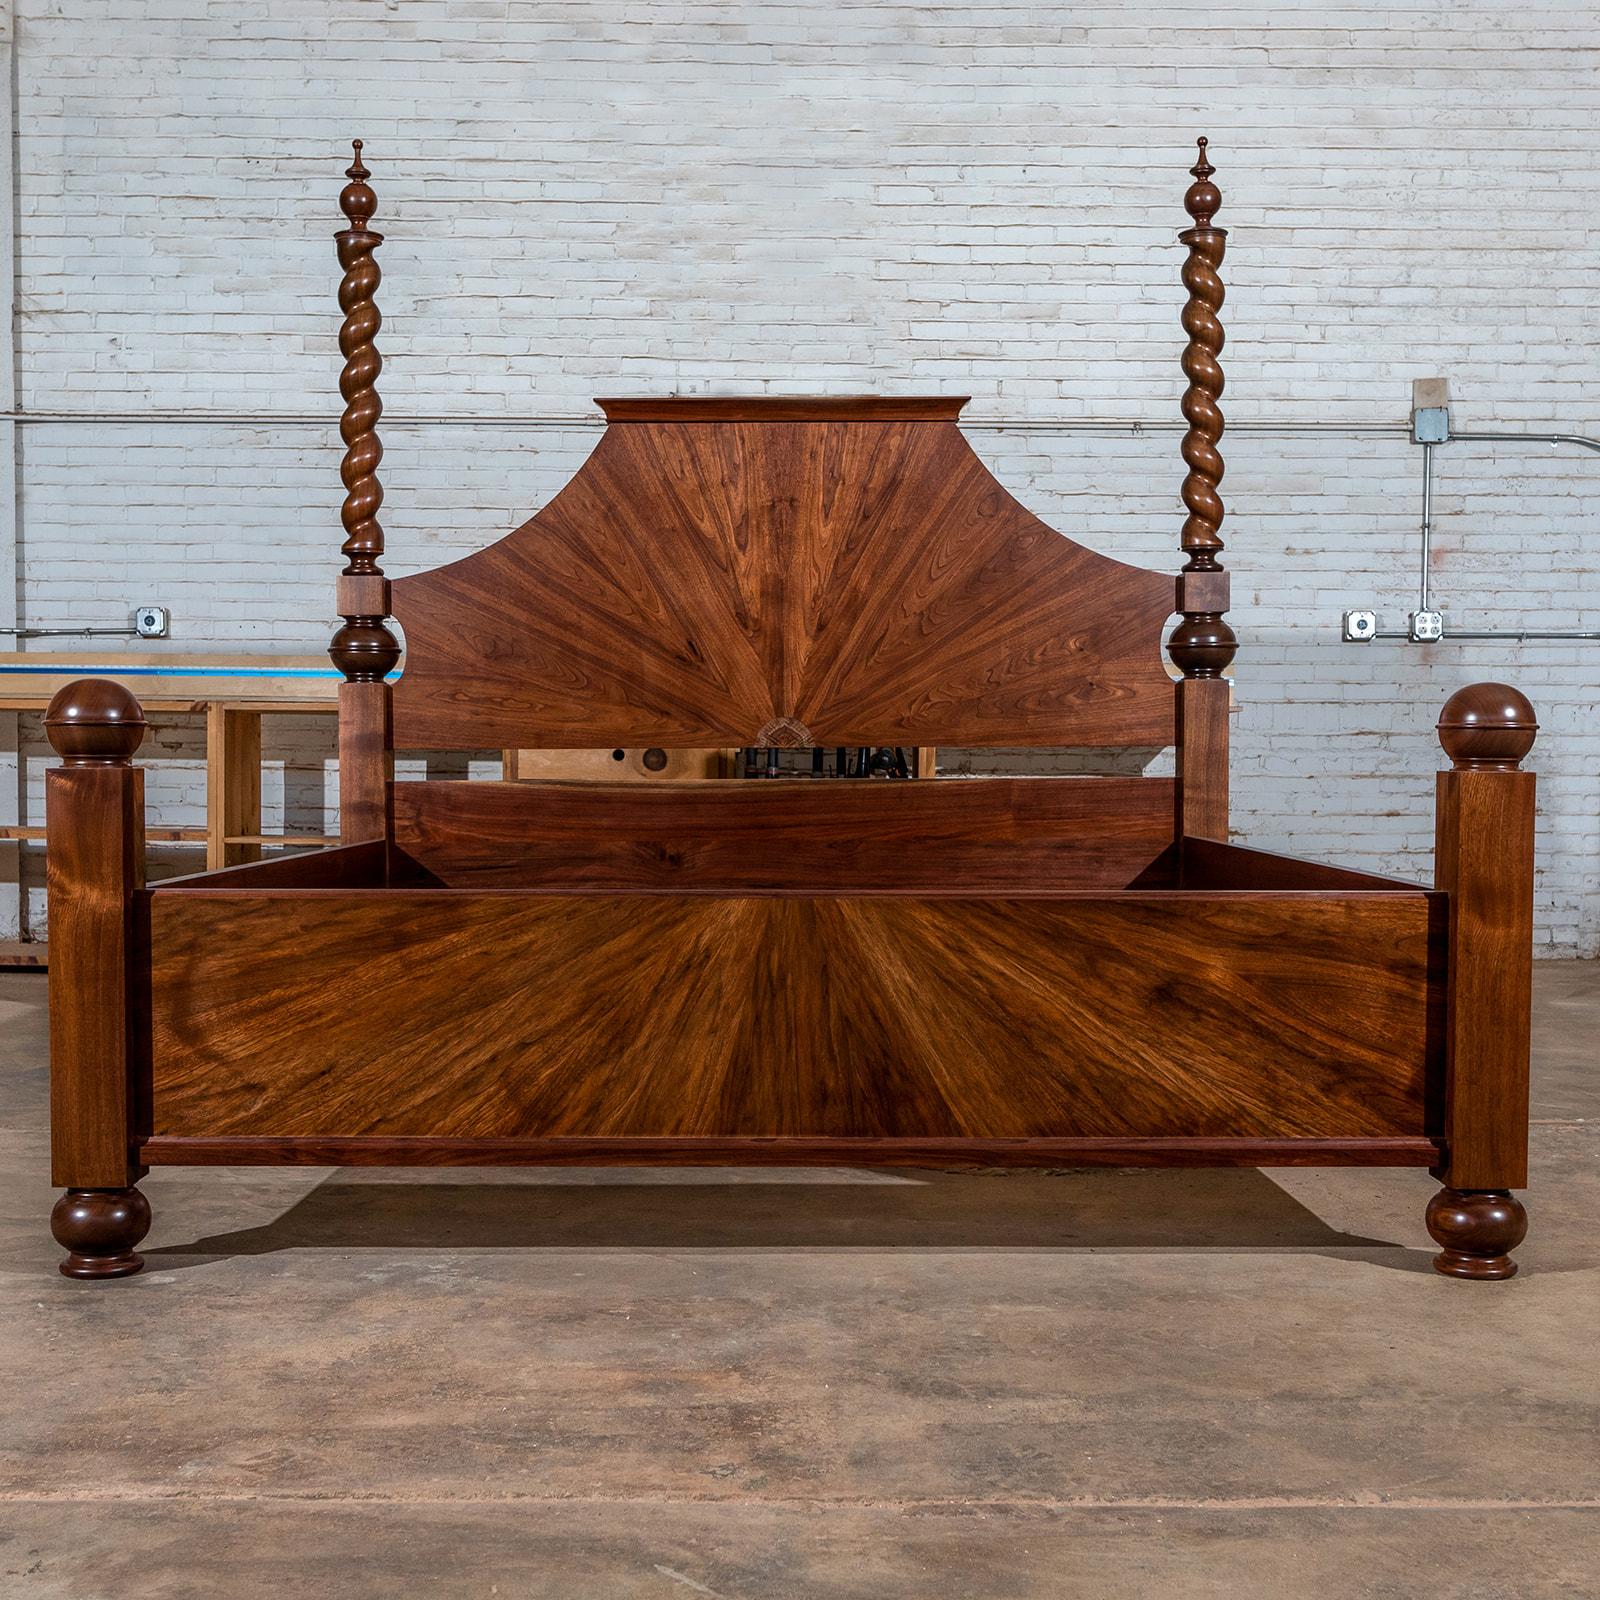 This one of a kind bespoke contemporary take on a Jacobean classic barley twist king size four-poster bed frame by master craftsman - artisan Martin Goebel. Made of Michigan black walnut that was salvaged from storm-damaged trees, is designed with a